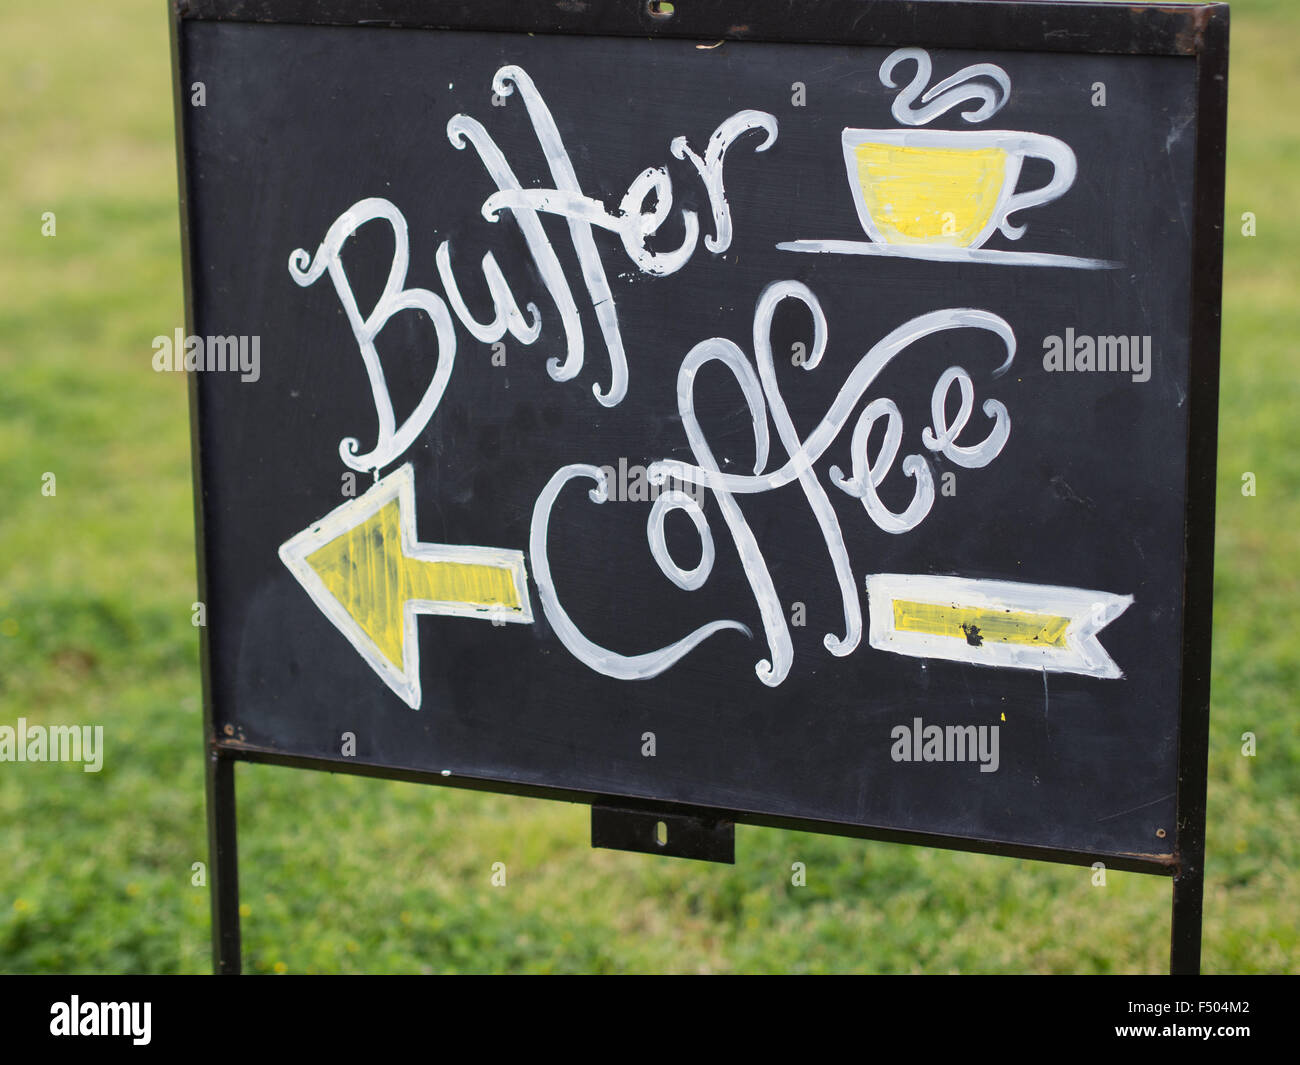 Butter Coffee sign Stock Photo